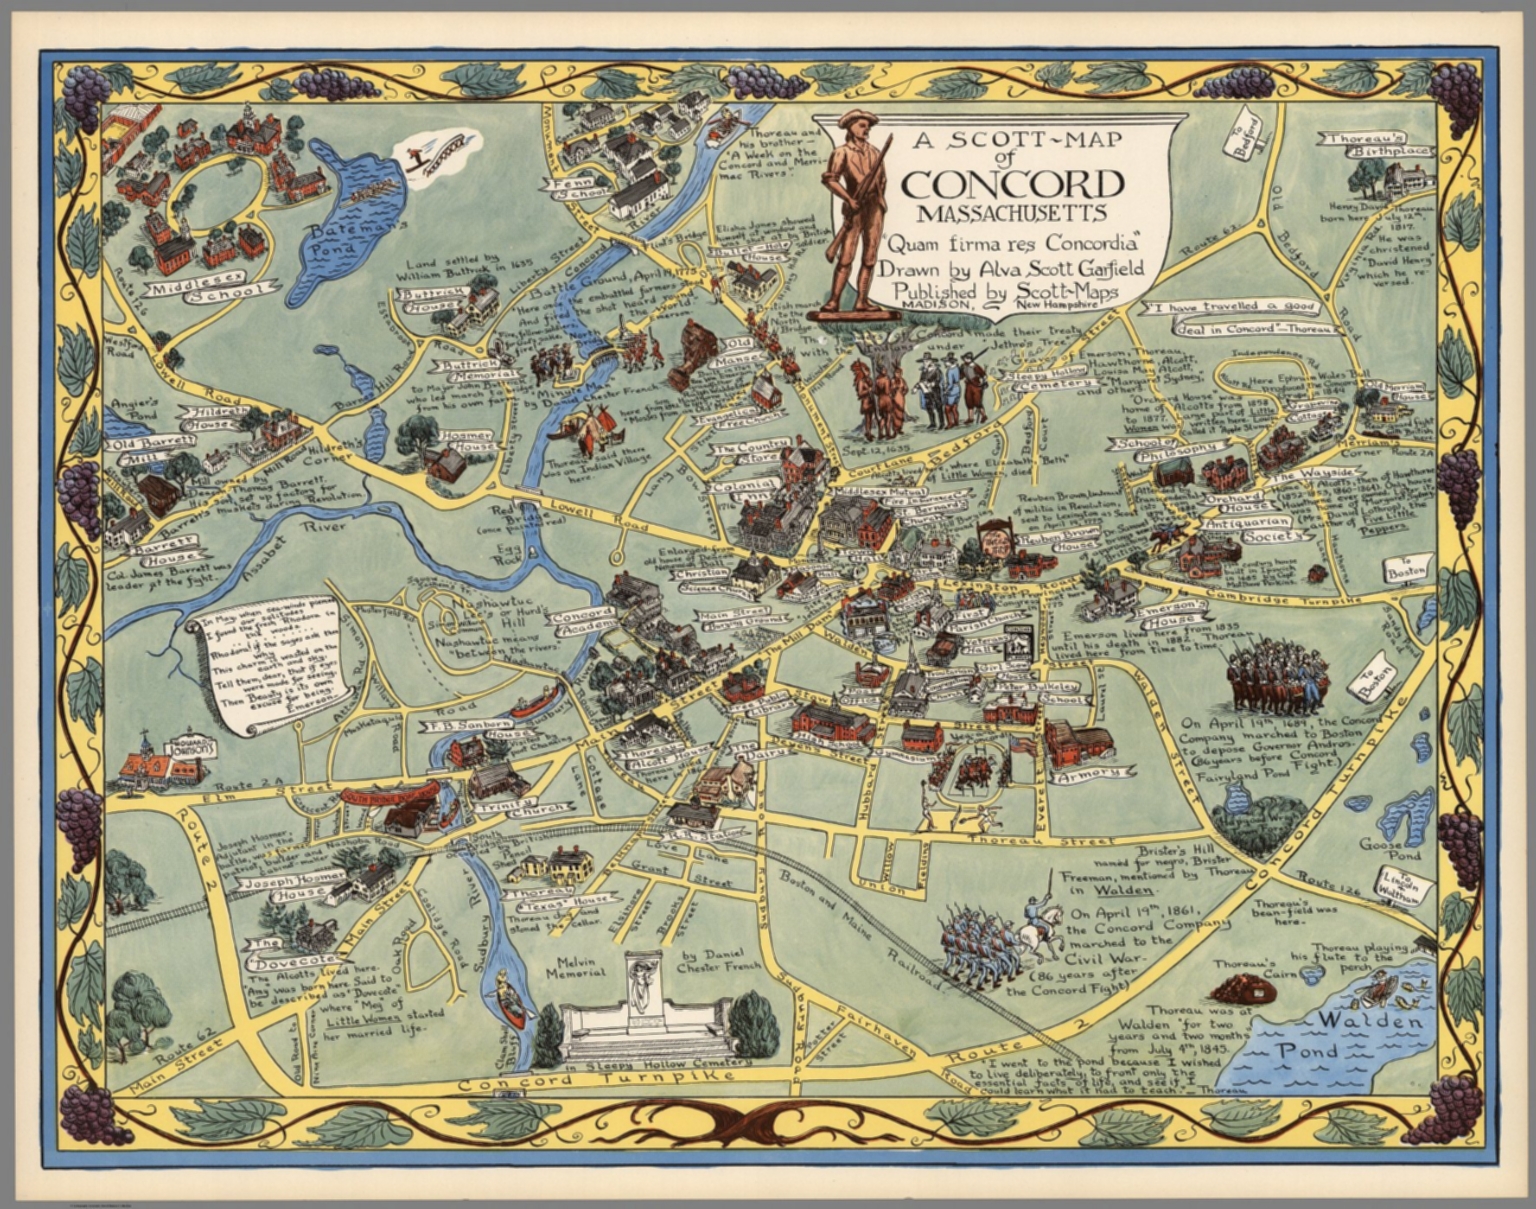 A ScottMap of Concord Massachusetts. David Rumsey Historical Map